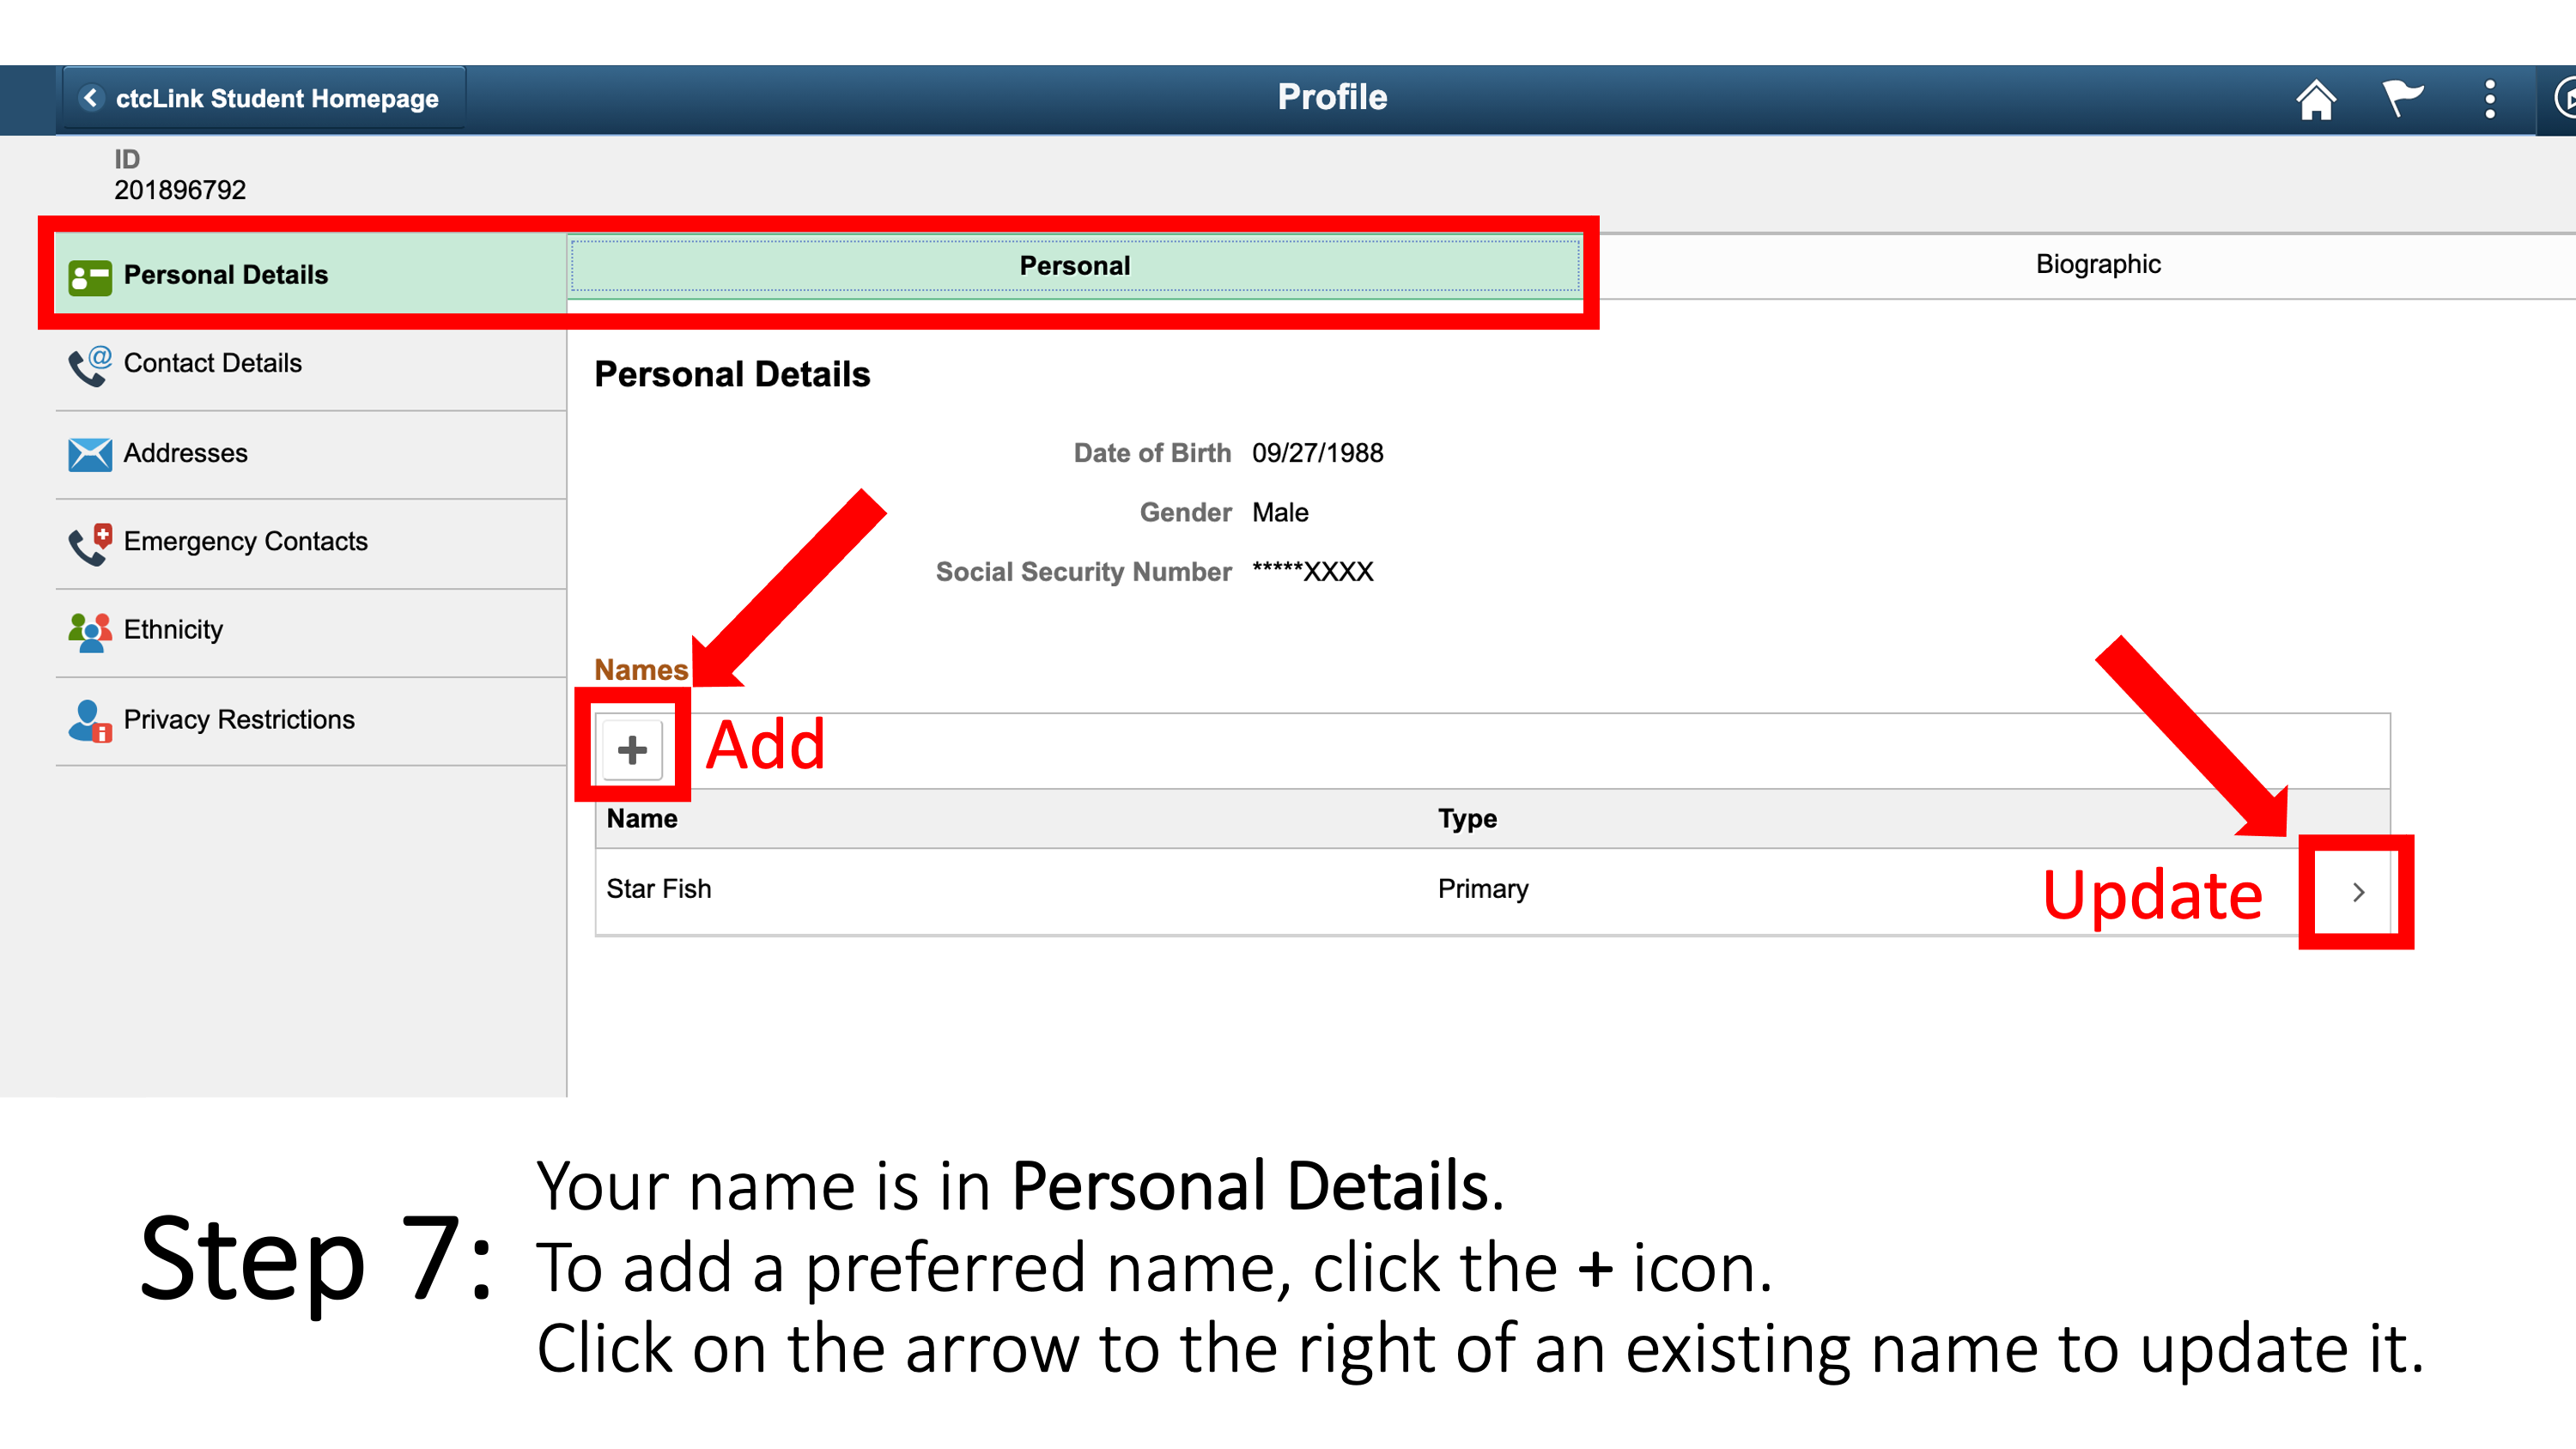 Your name is in Personal Details. To add a preferred name, click the + icon. Click on the arrow to the right of an existing name to update it.